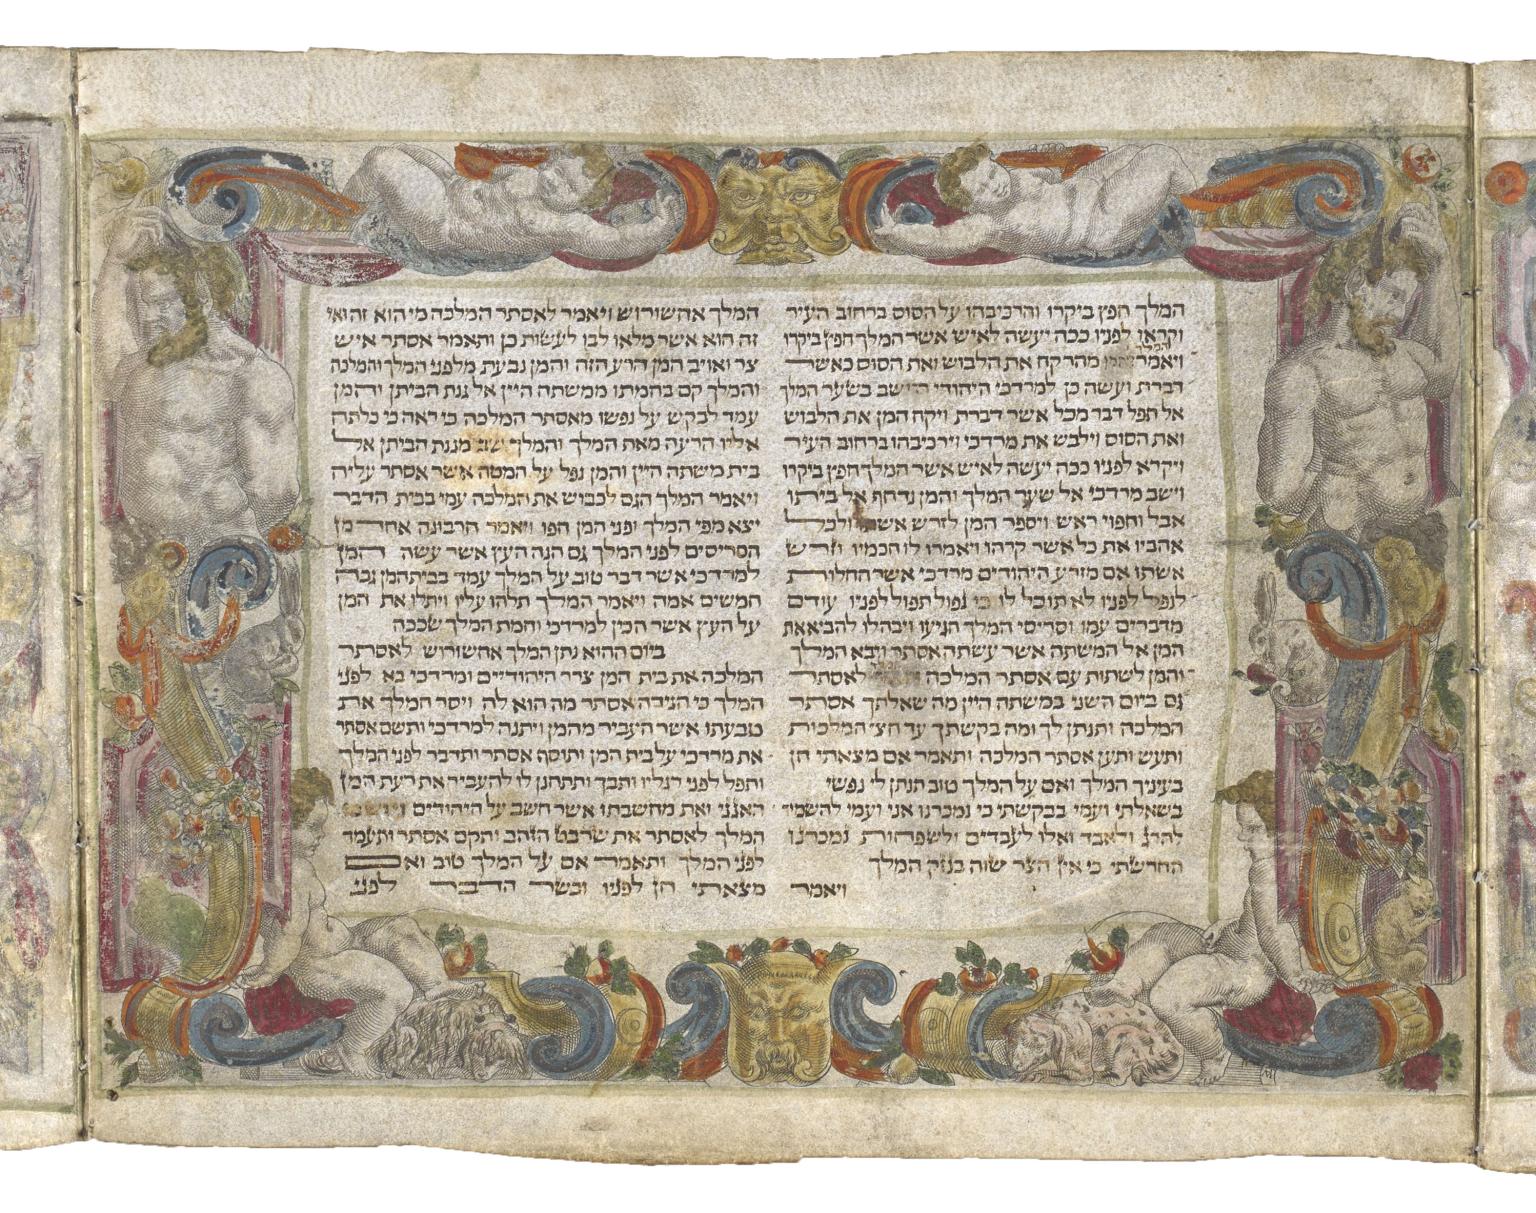 Manuscript scroll page with Hebrew text and decorated border with illustrations of cherubs, faces, animals, ribbons, and flowers. 